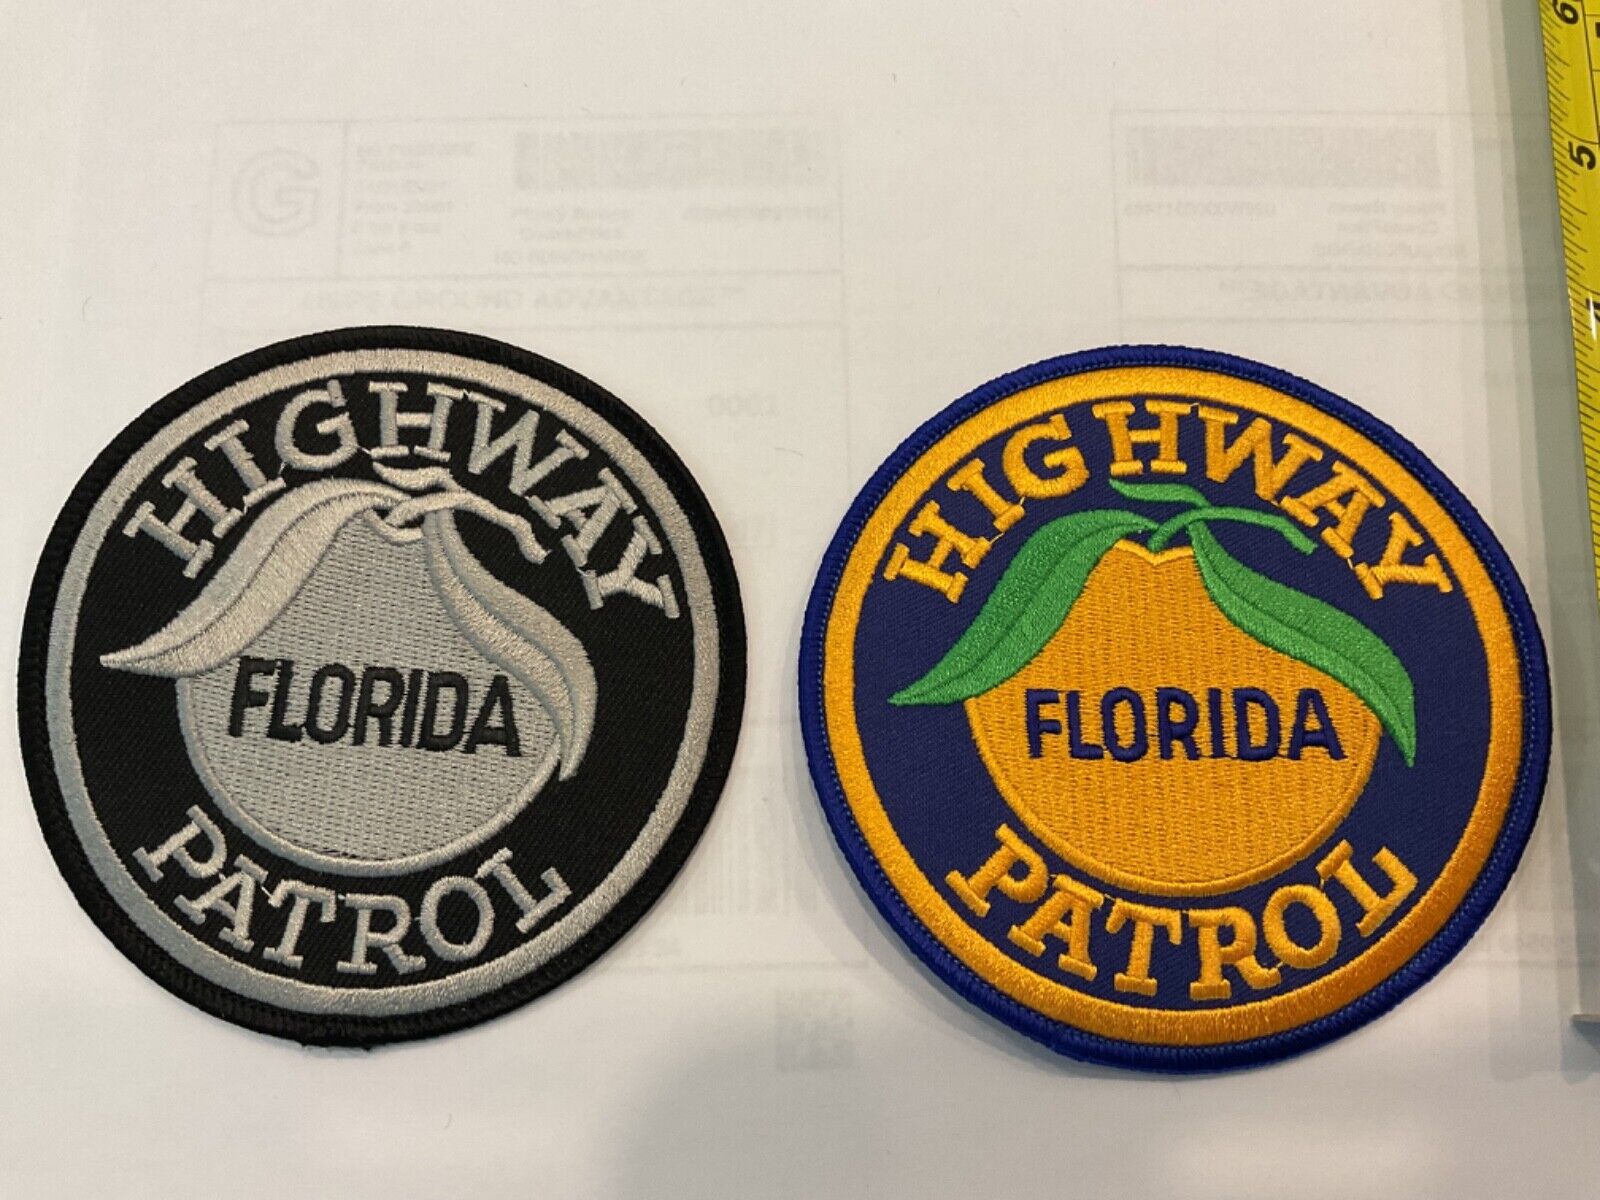 Florida Highway Patrol collectable Patch Set 2 pieces New